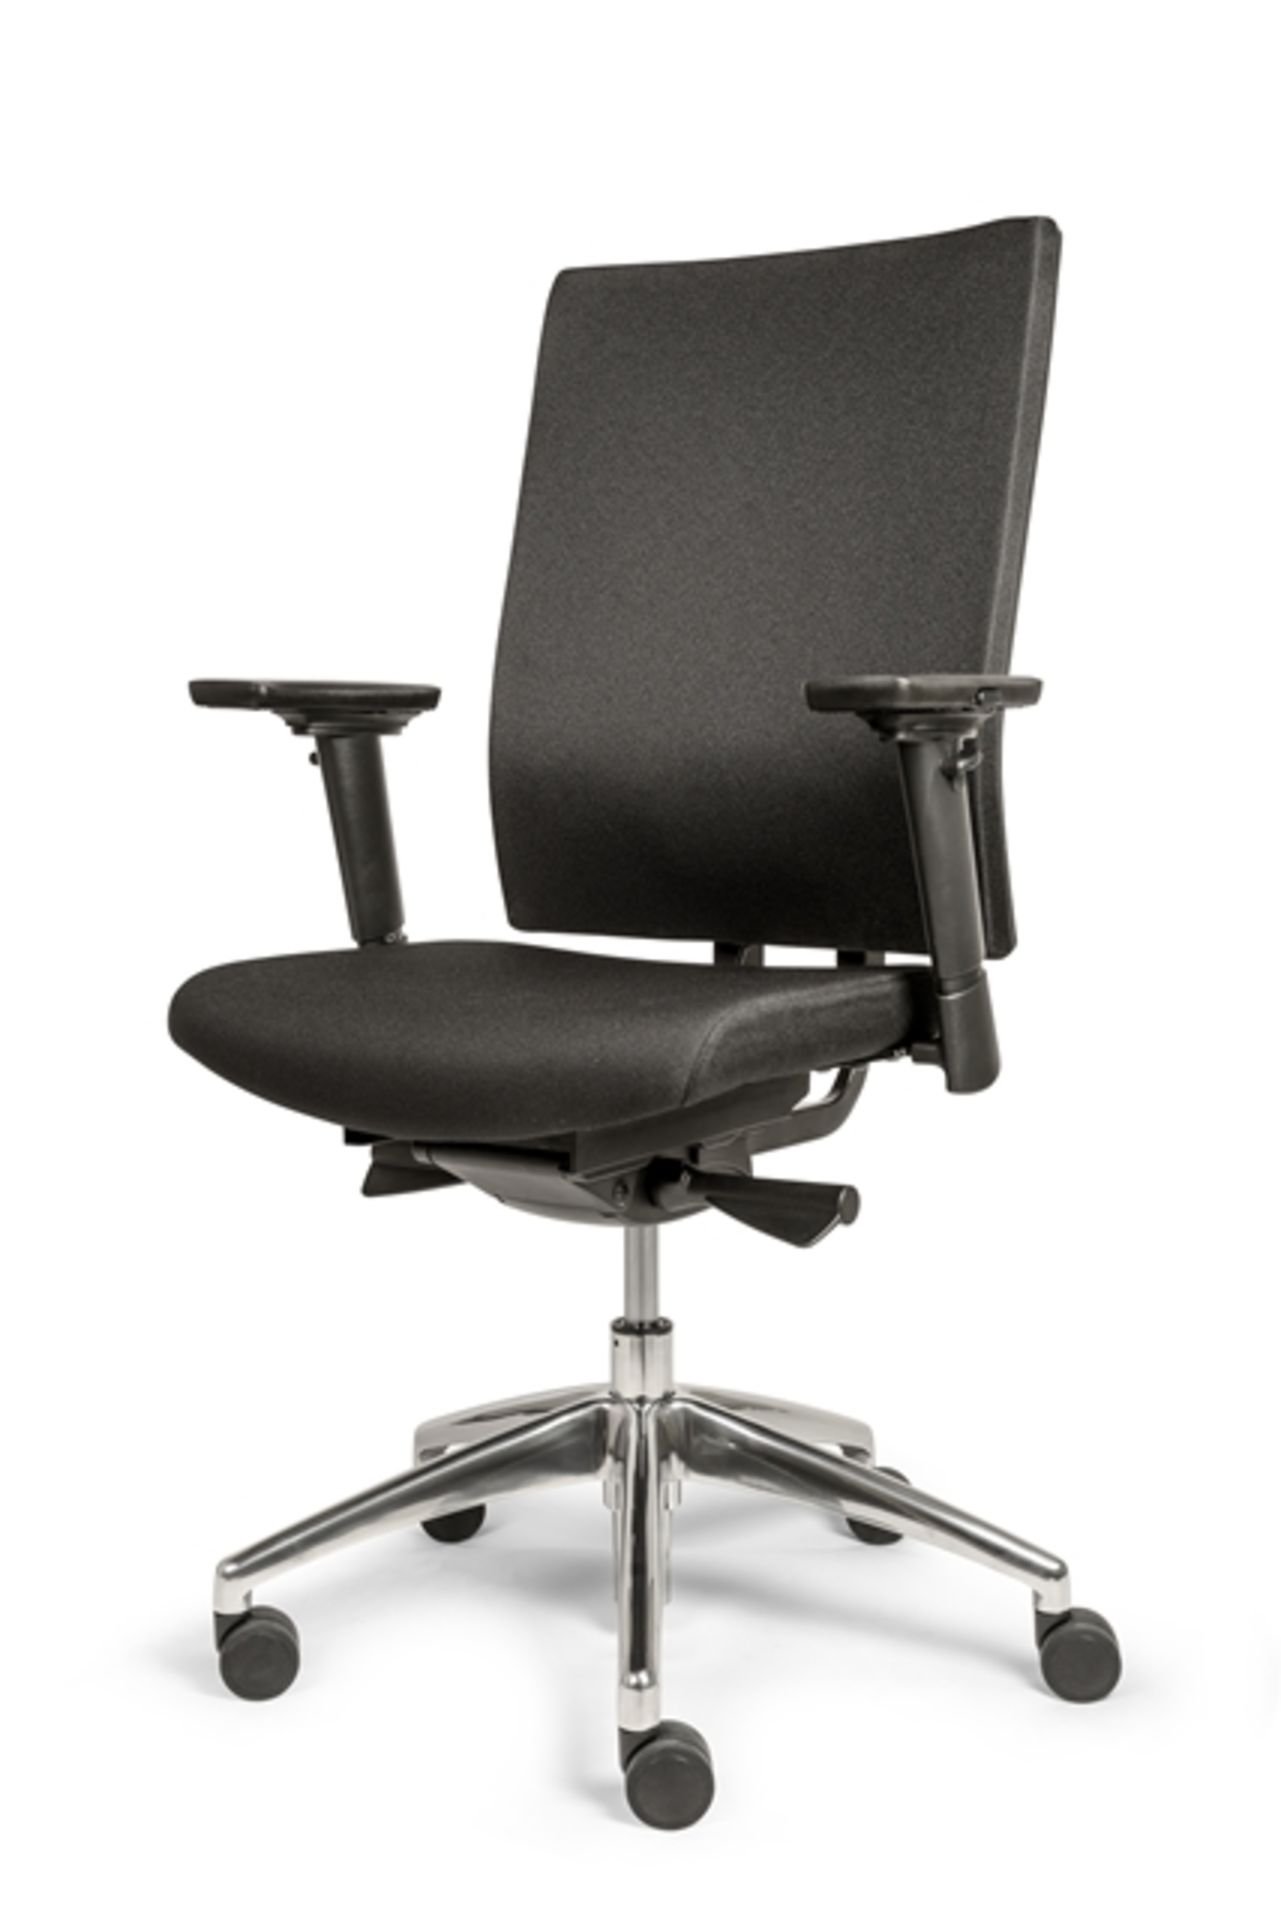 Unused ergonomic fully upholstered office chair in black (RRP £289) located in Stafford, viewing - Image 2 of 7